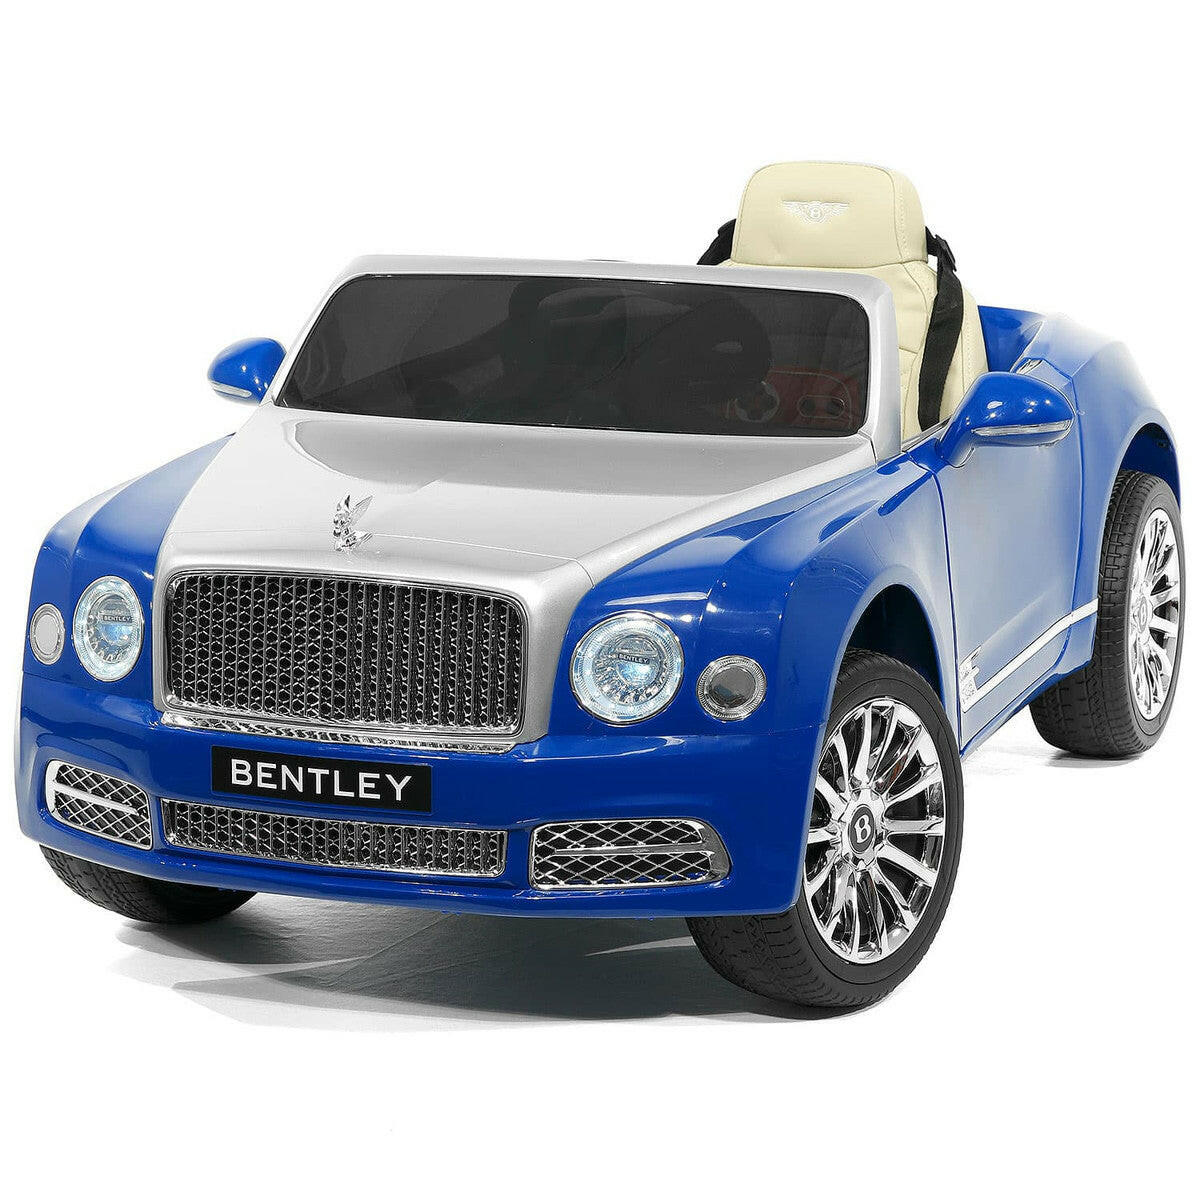 Bentley Mulsanne 12V Ride On Control remoto para padres Luces LED MP3